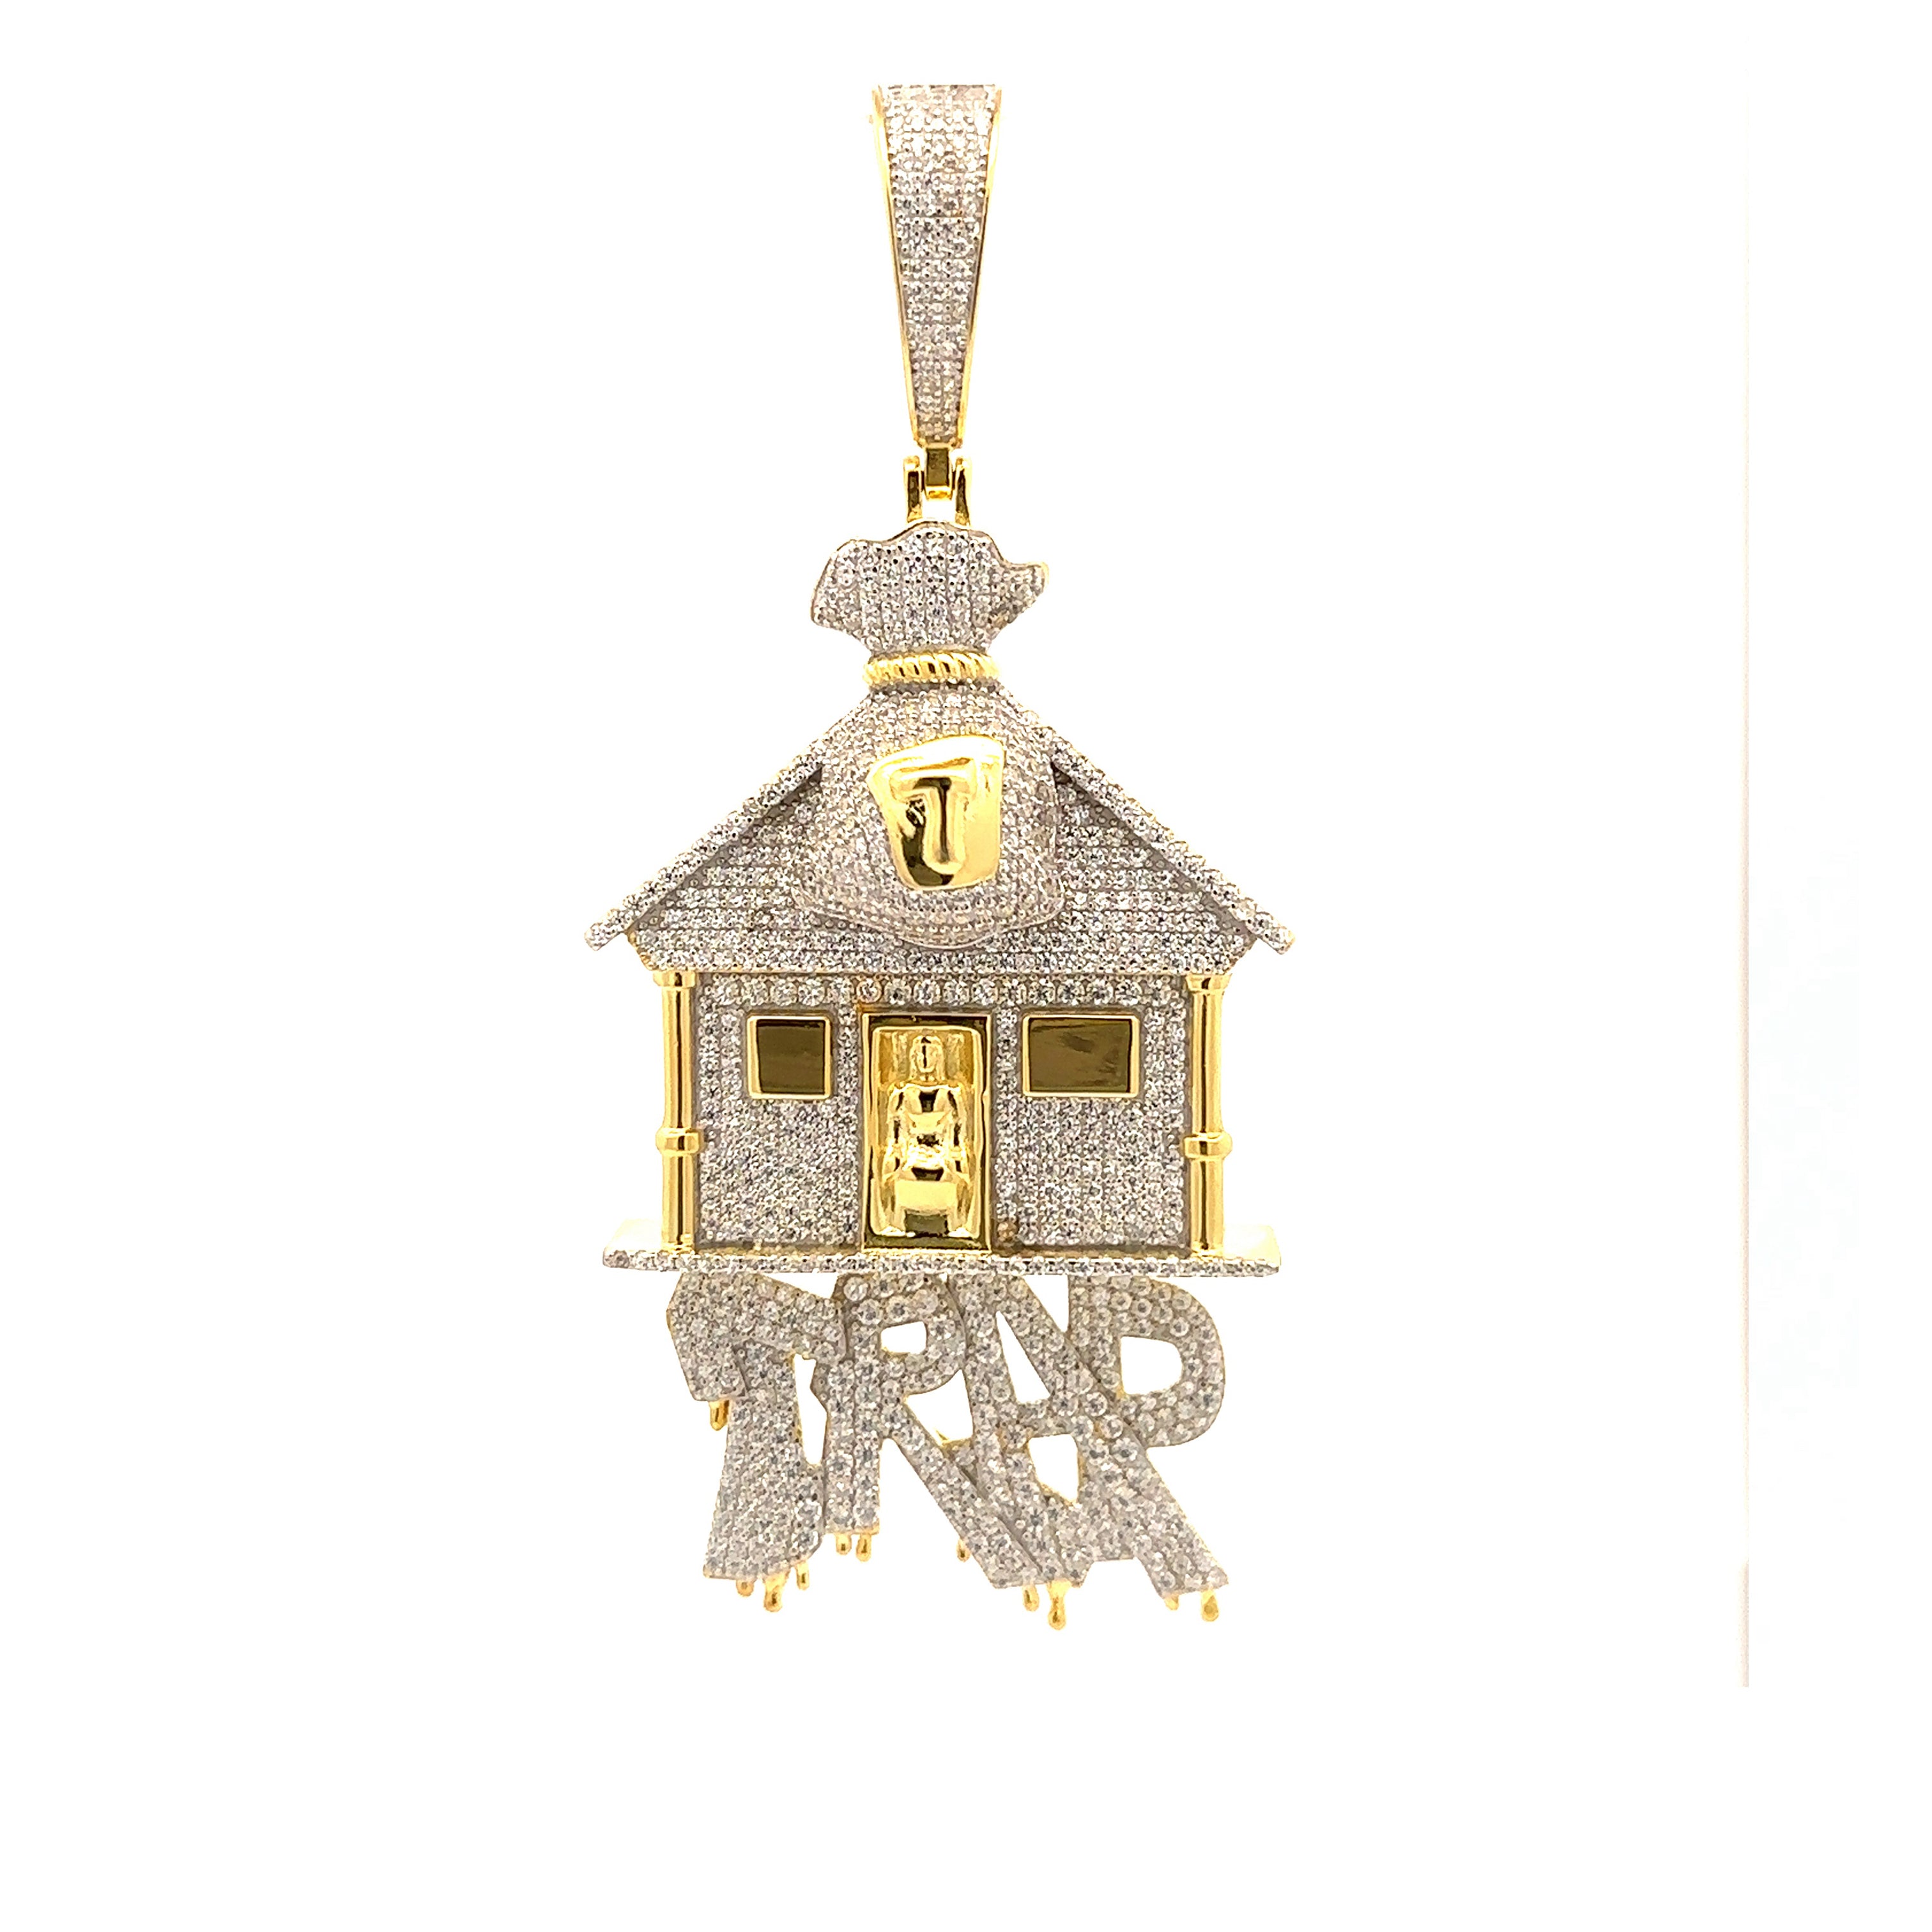 AEONIAN 925 CZ GOLD ICED OUT PENDANT | 9222712